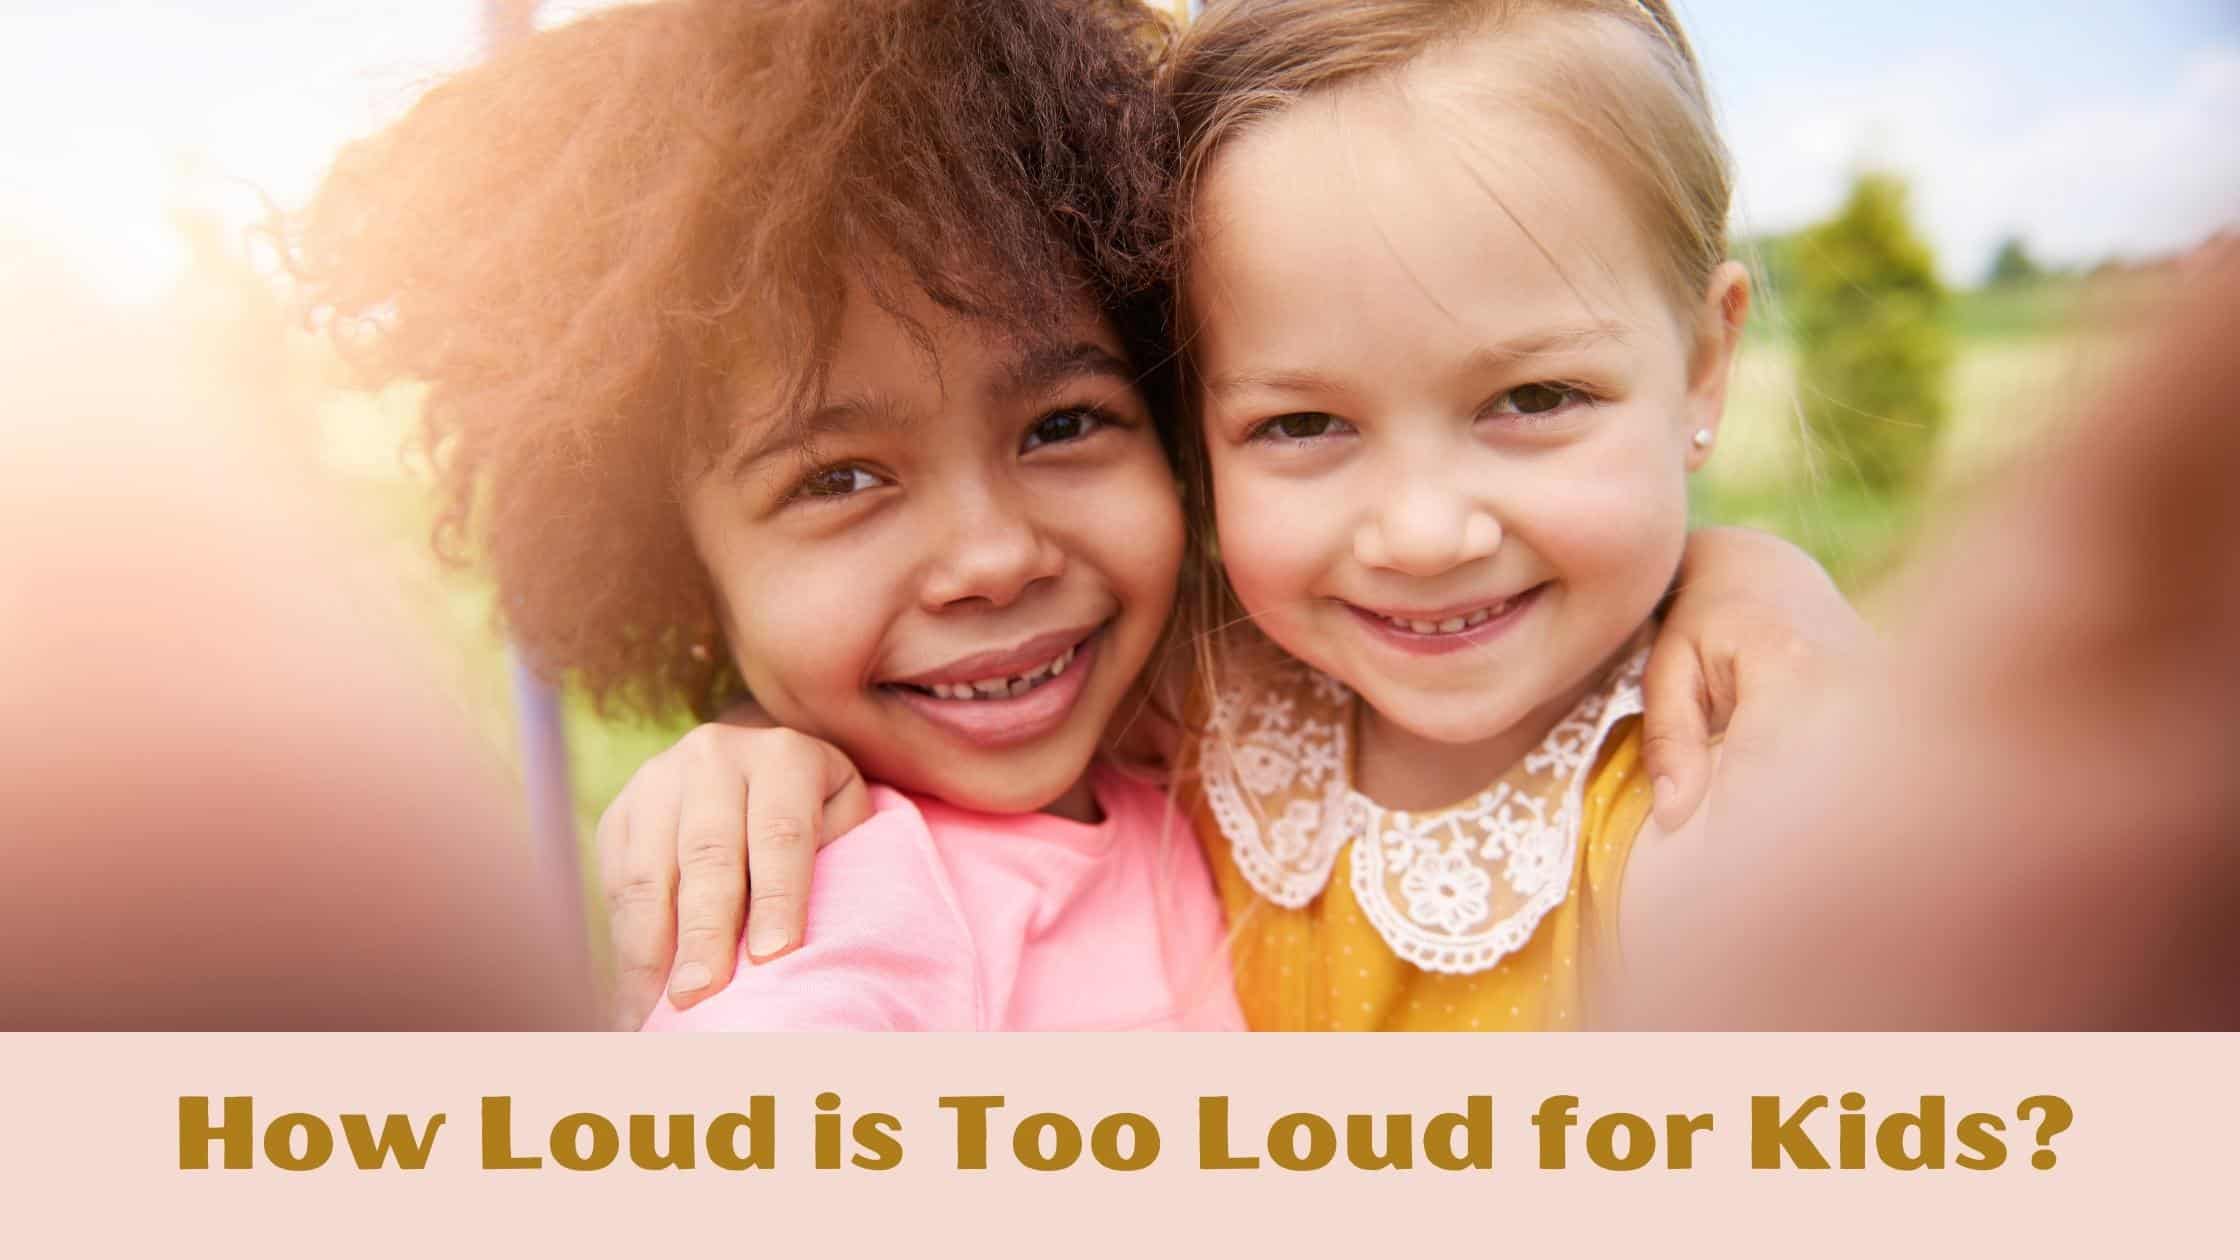 Featured image for “How Loud is Too Loud for Kids?”